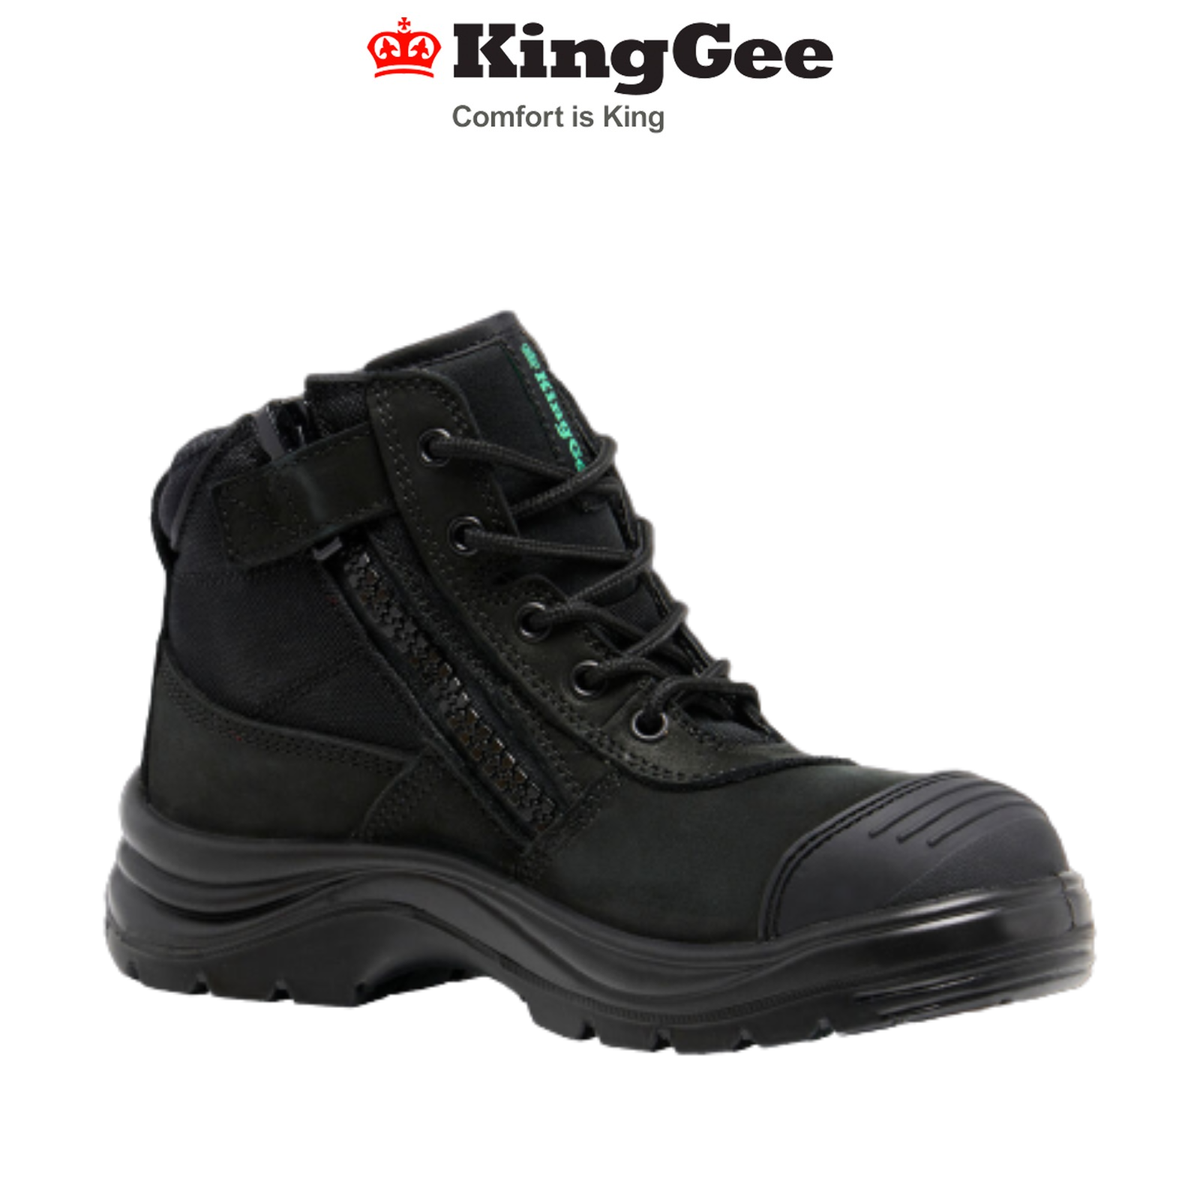 KingGee Womens Tradie 5 Work Boots Work Safety Memory Foam Toe Protect K26490